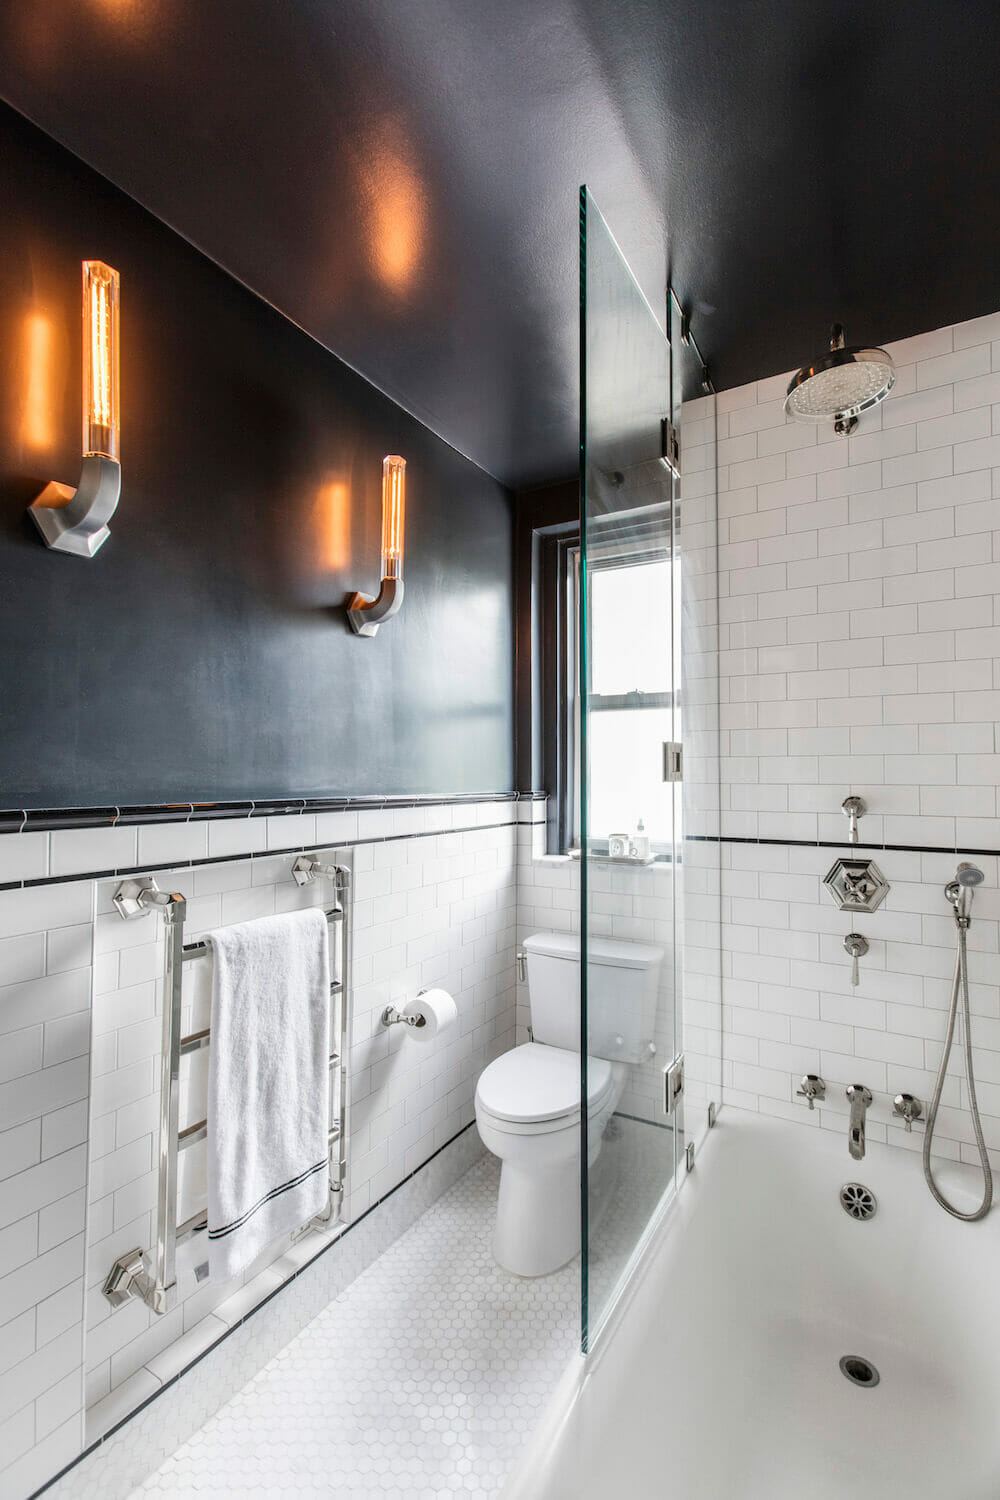 Black and white bathroom with shower glass and wall sconces and white bathtub after renovation